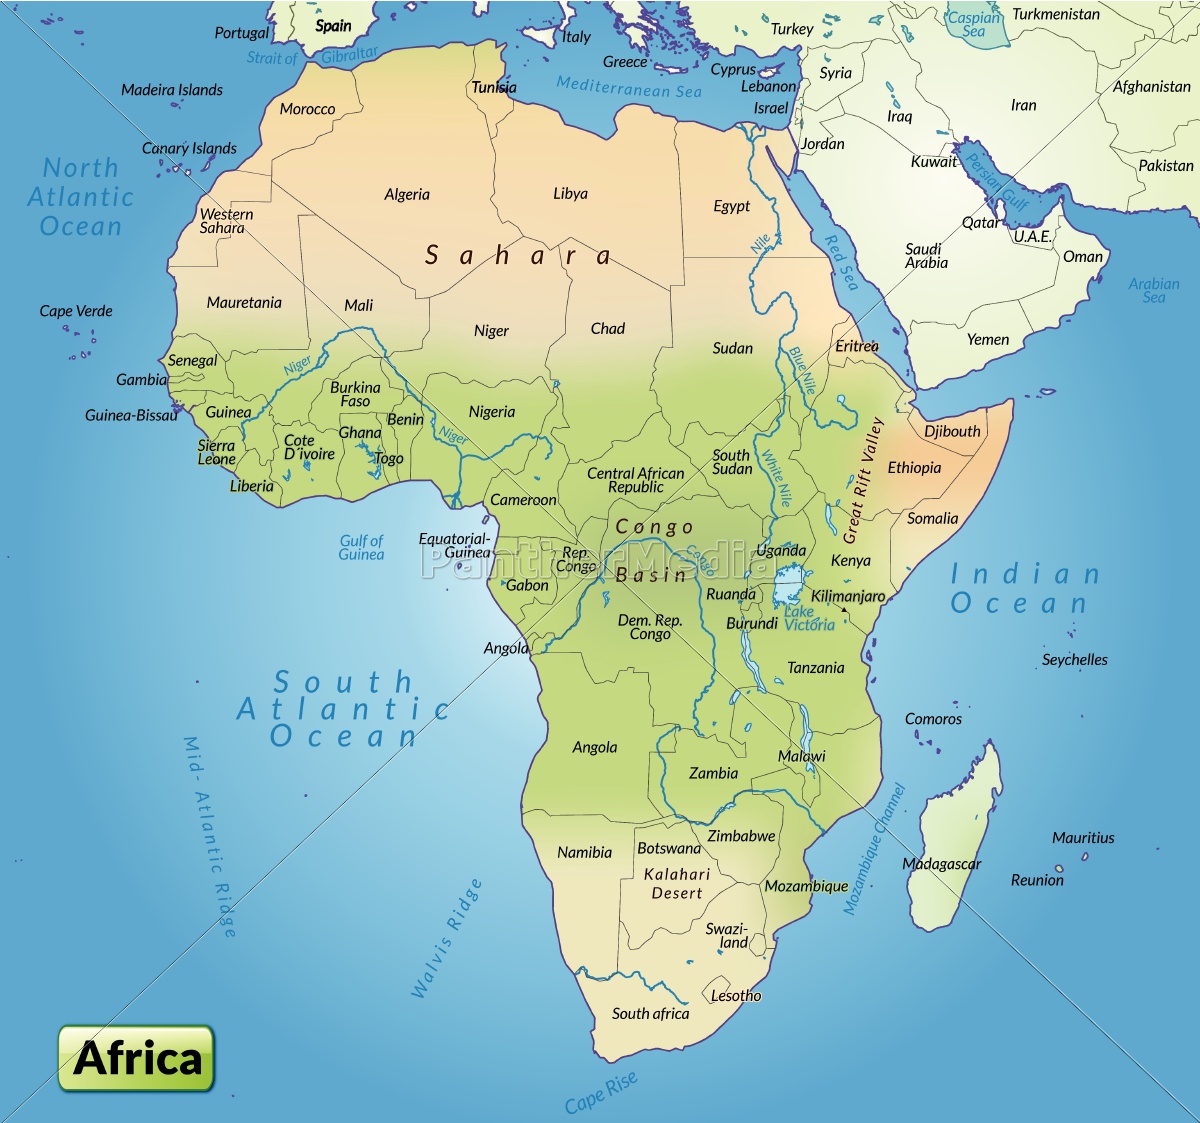 map of africa as an overview map - Stock Photo - #10655039